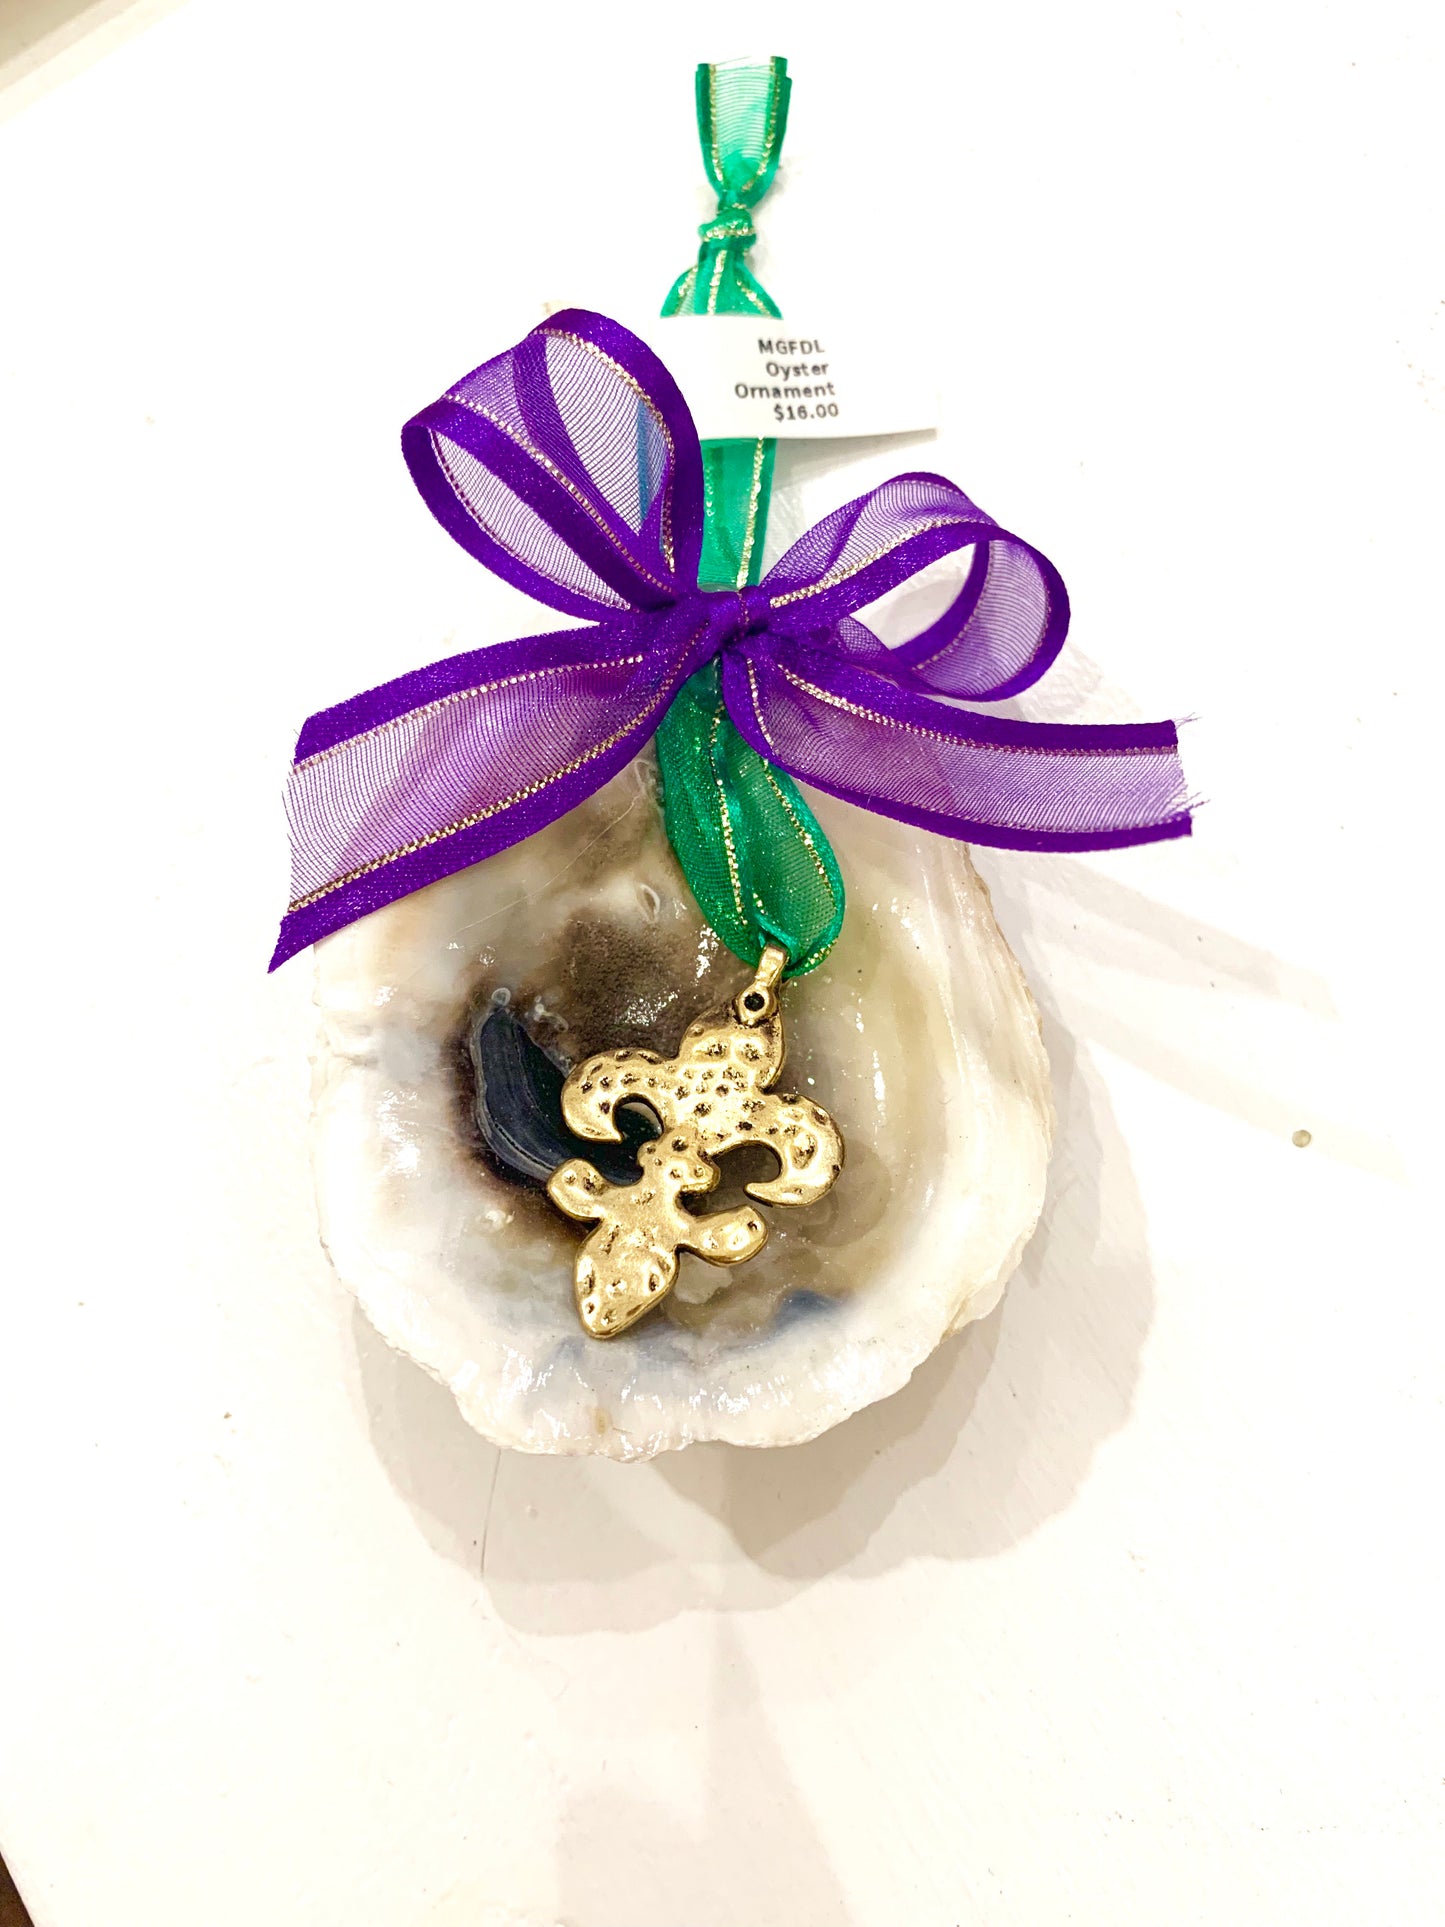 MGFDL Oyster Ornament